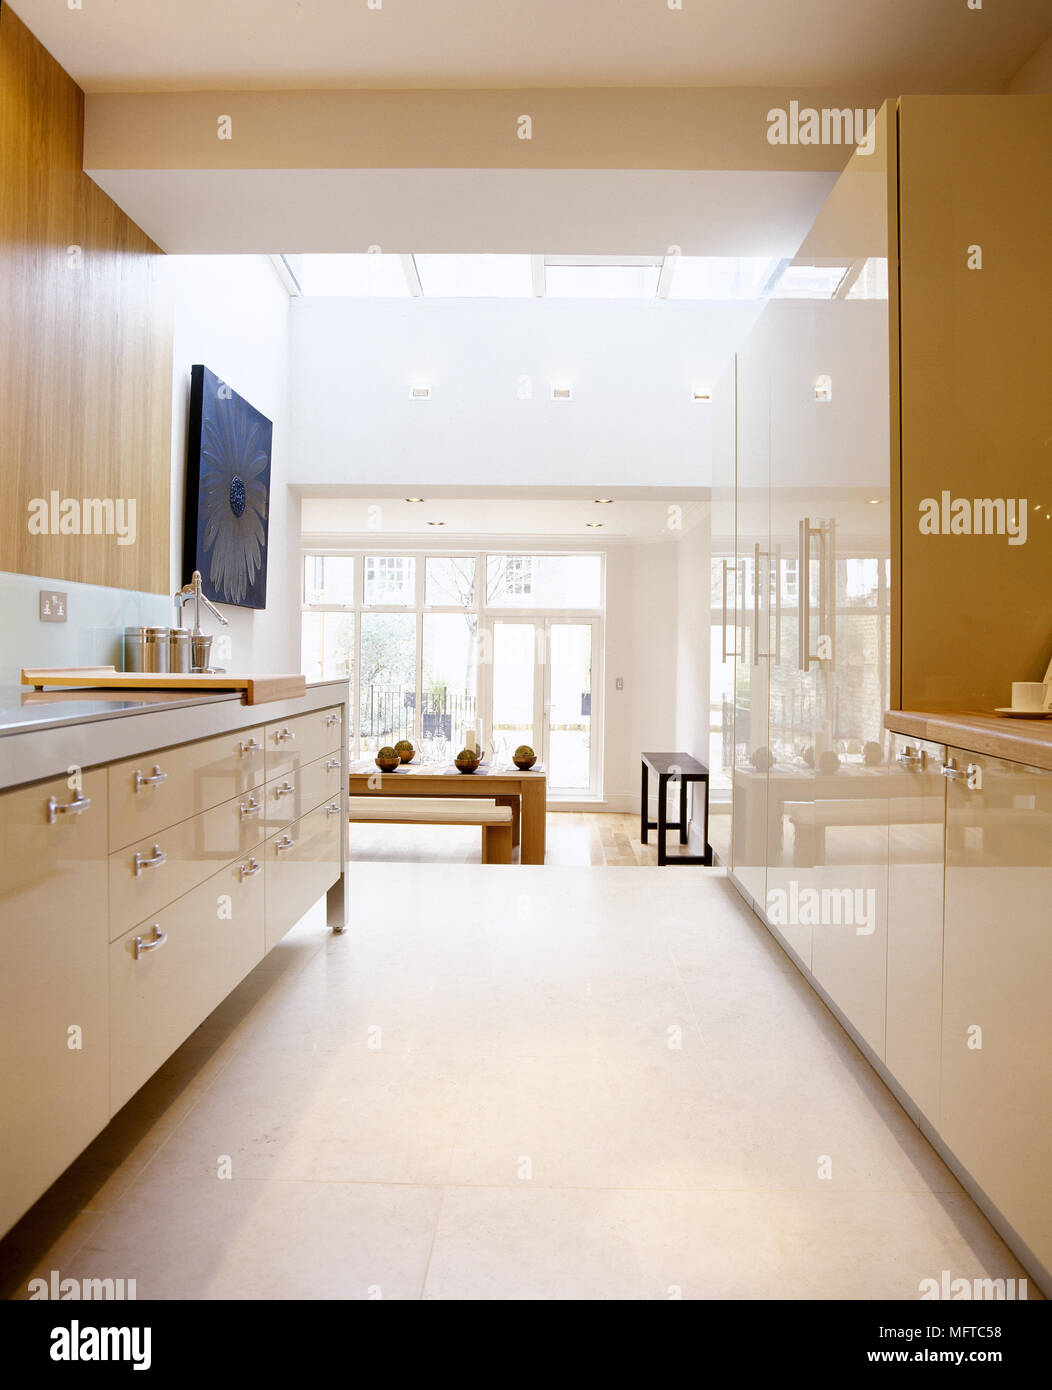 https://c8.alamy.com/comp/MFTC58/modern-kitchen-with-polished-cabinets-tile-floor-and-adjacent-dining-area-with-skylights-and-windows-MFTC58.jpg